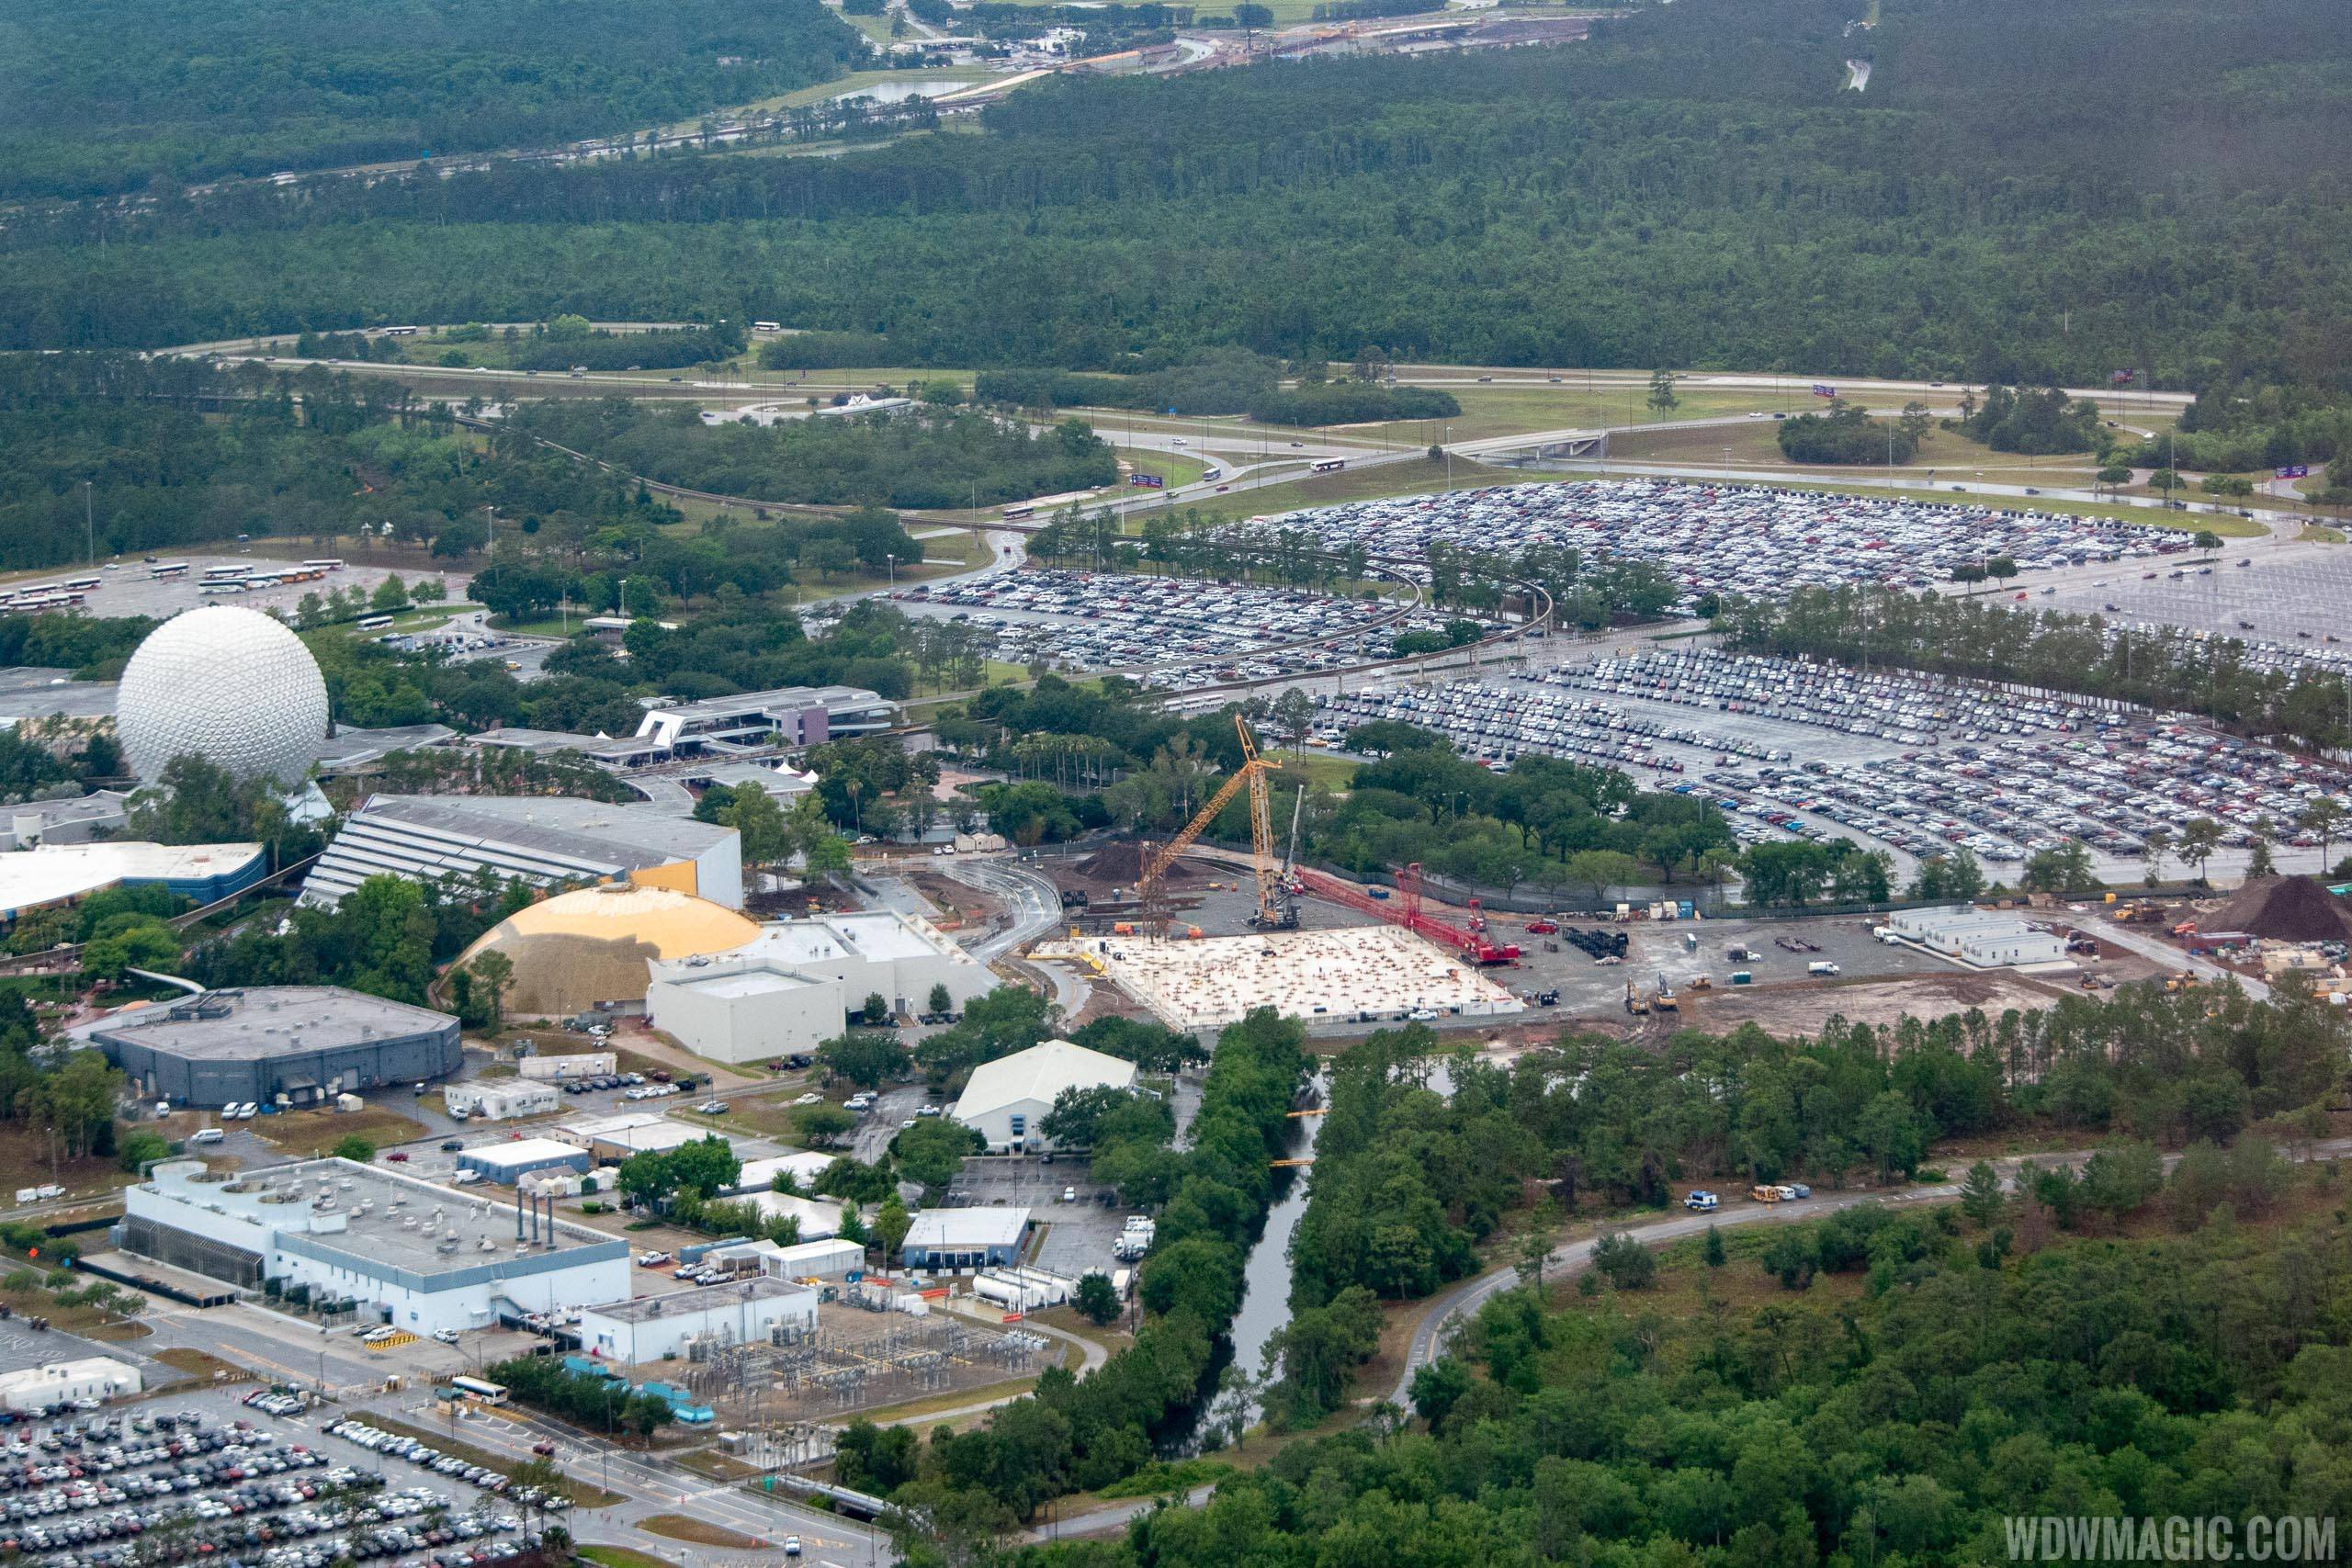 PHOTOS - Aerial views of Guardians of the Galaxy coaster construction at Epcot